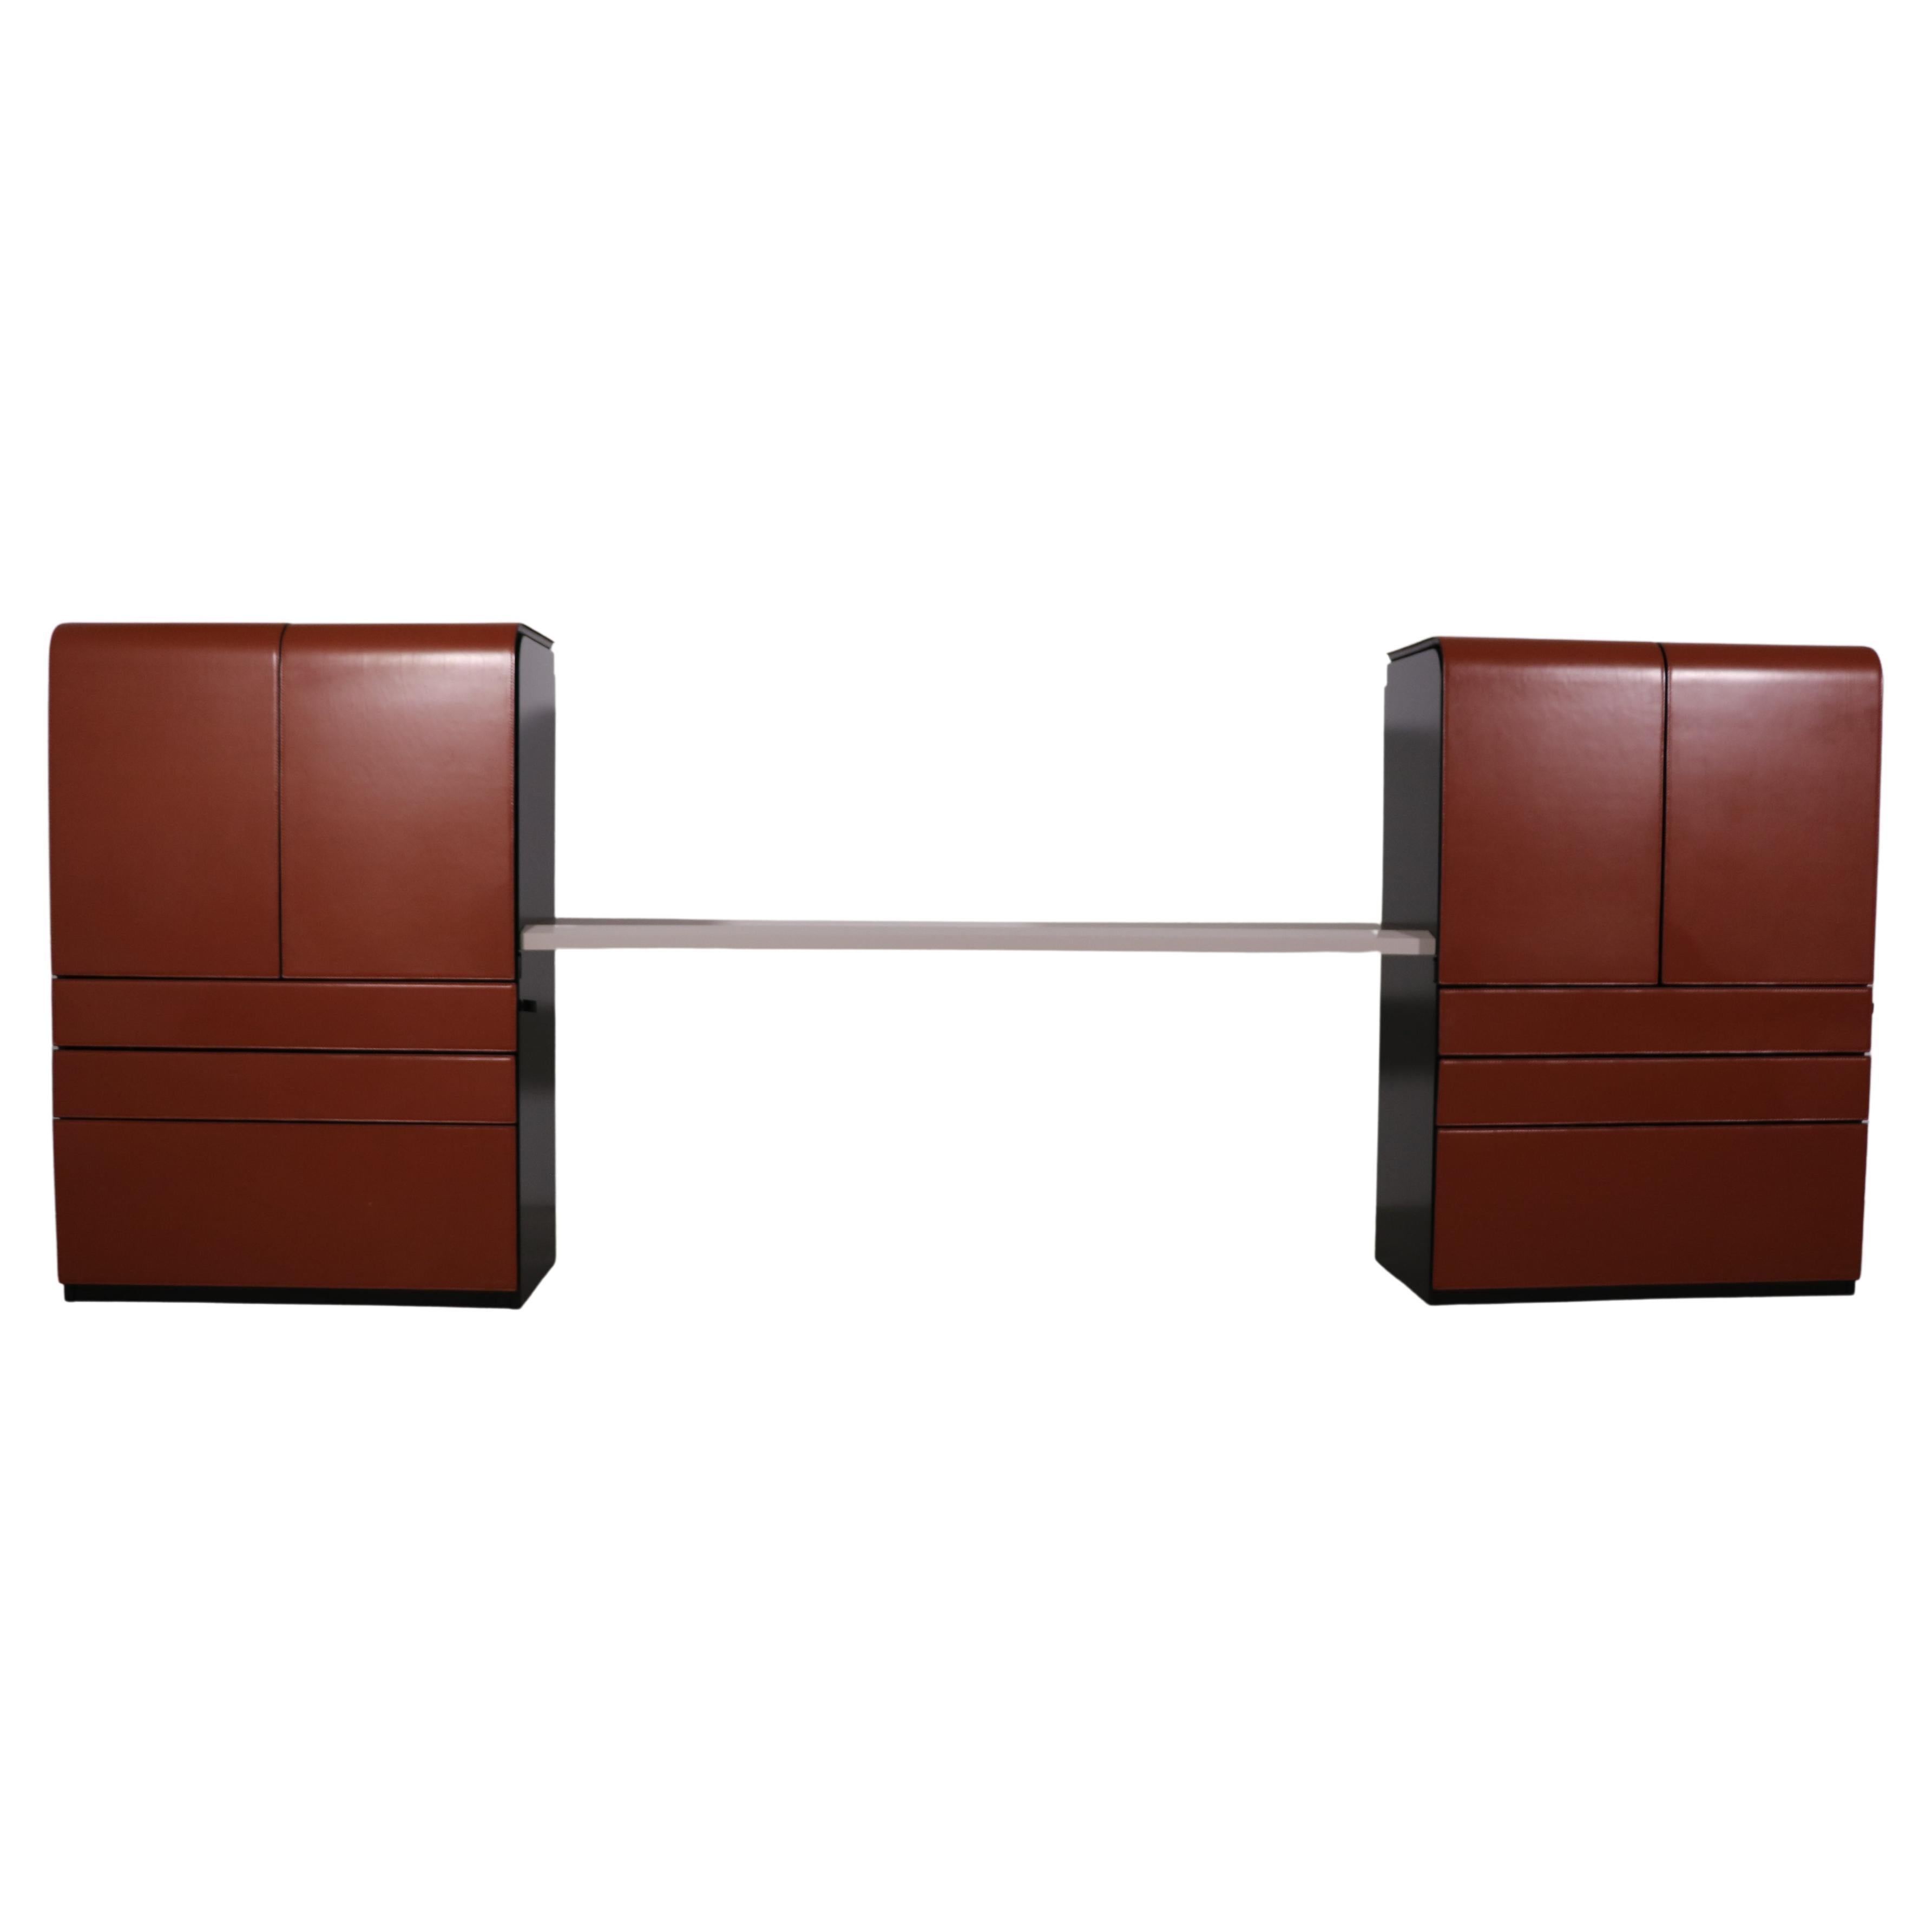 Matteo Grassi Sideboard Metron collection Italy For Sale